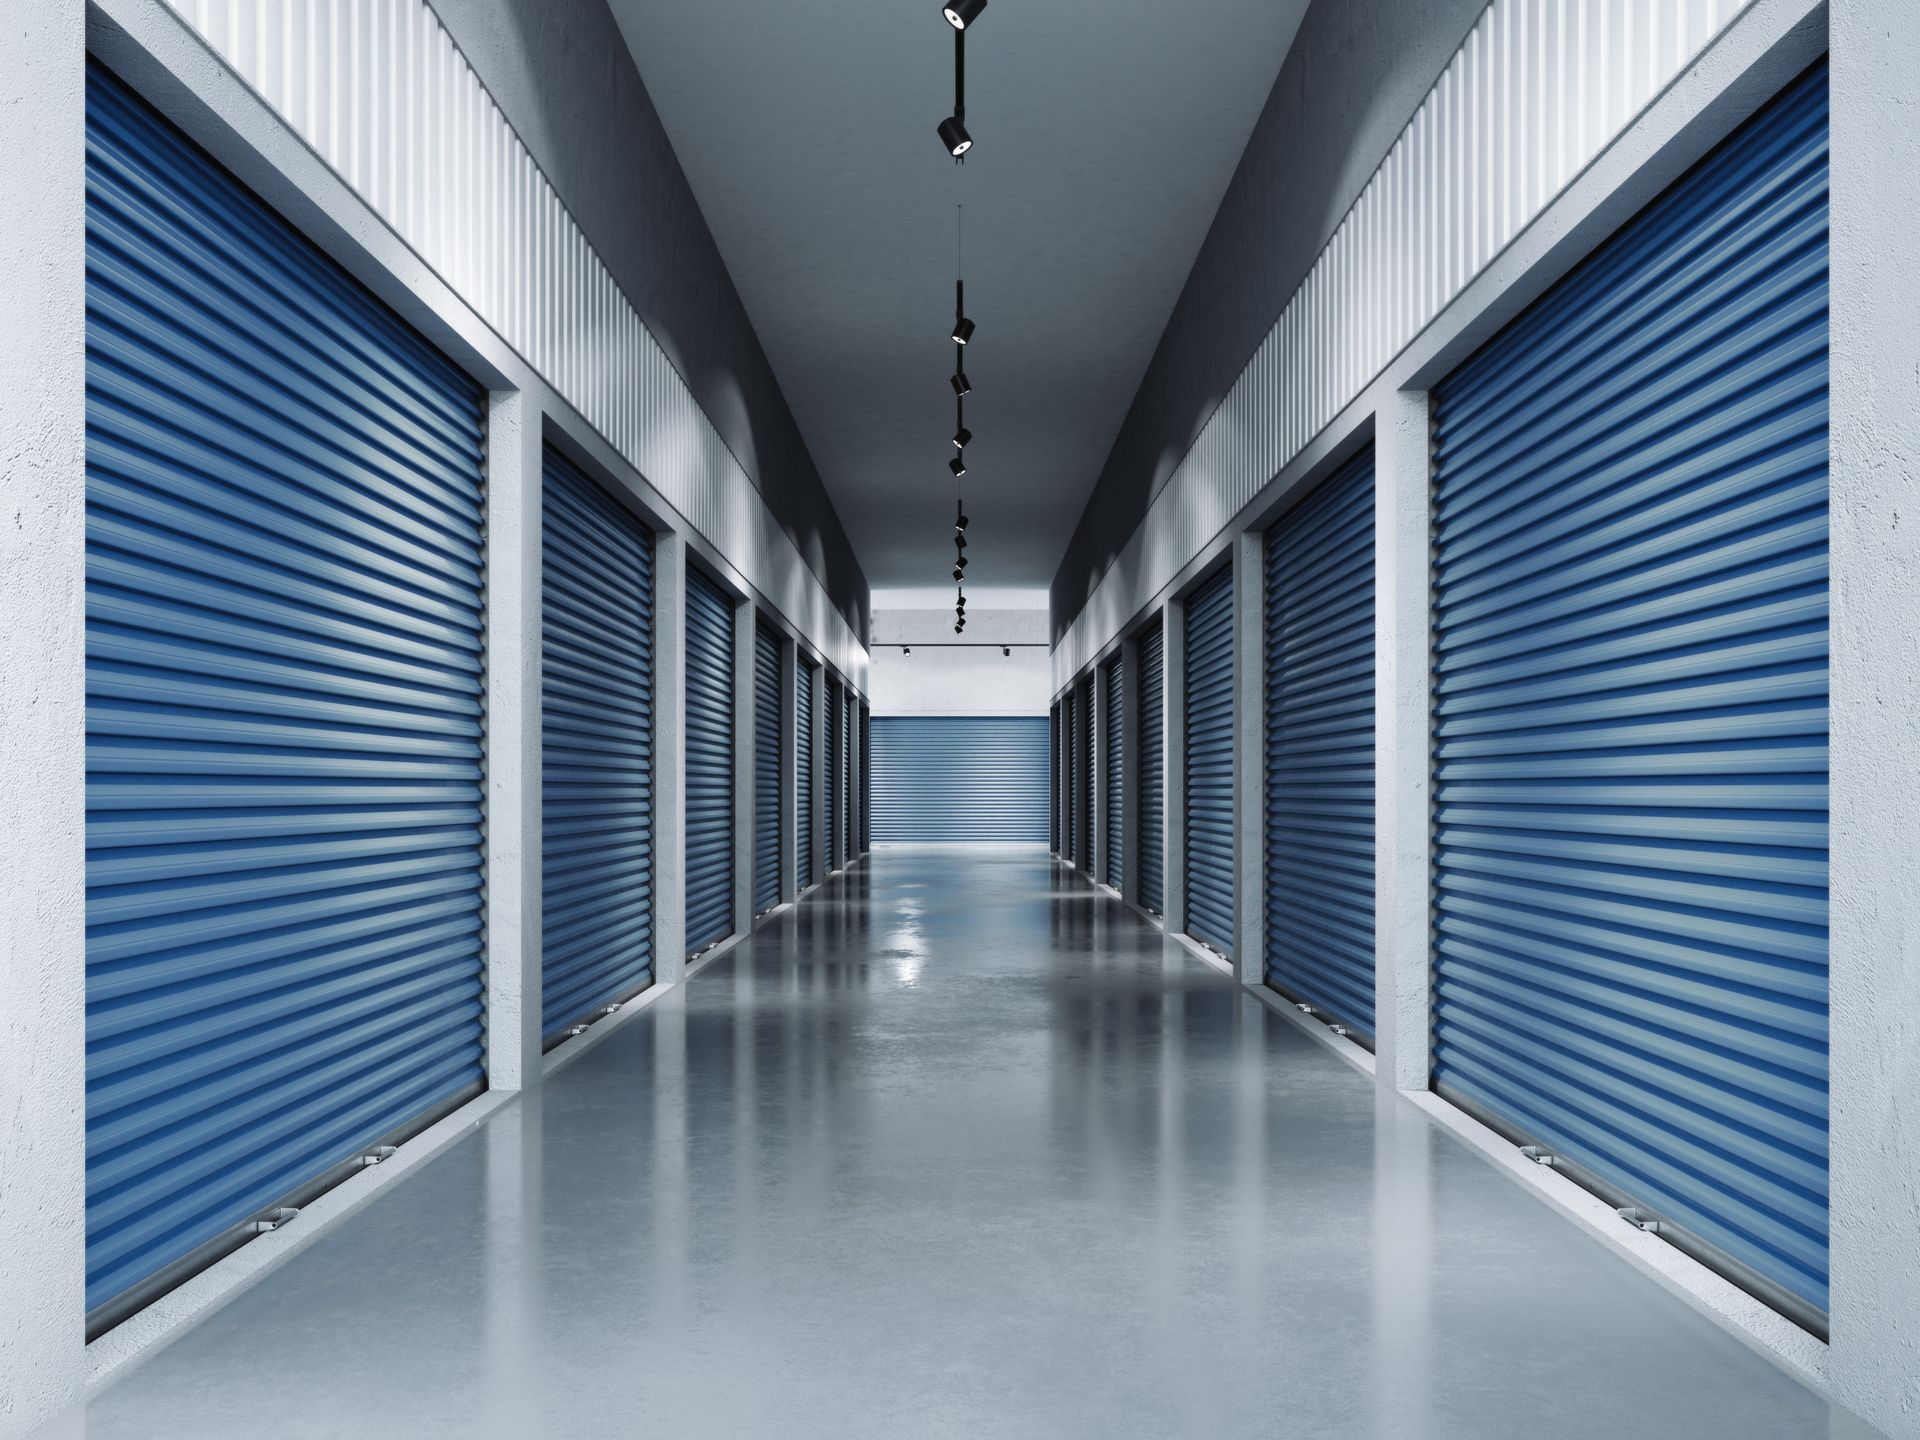 A long hallway with blue shutters on the doors